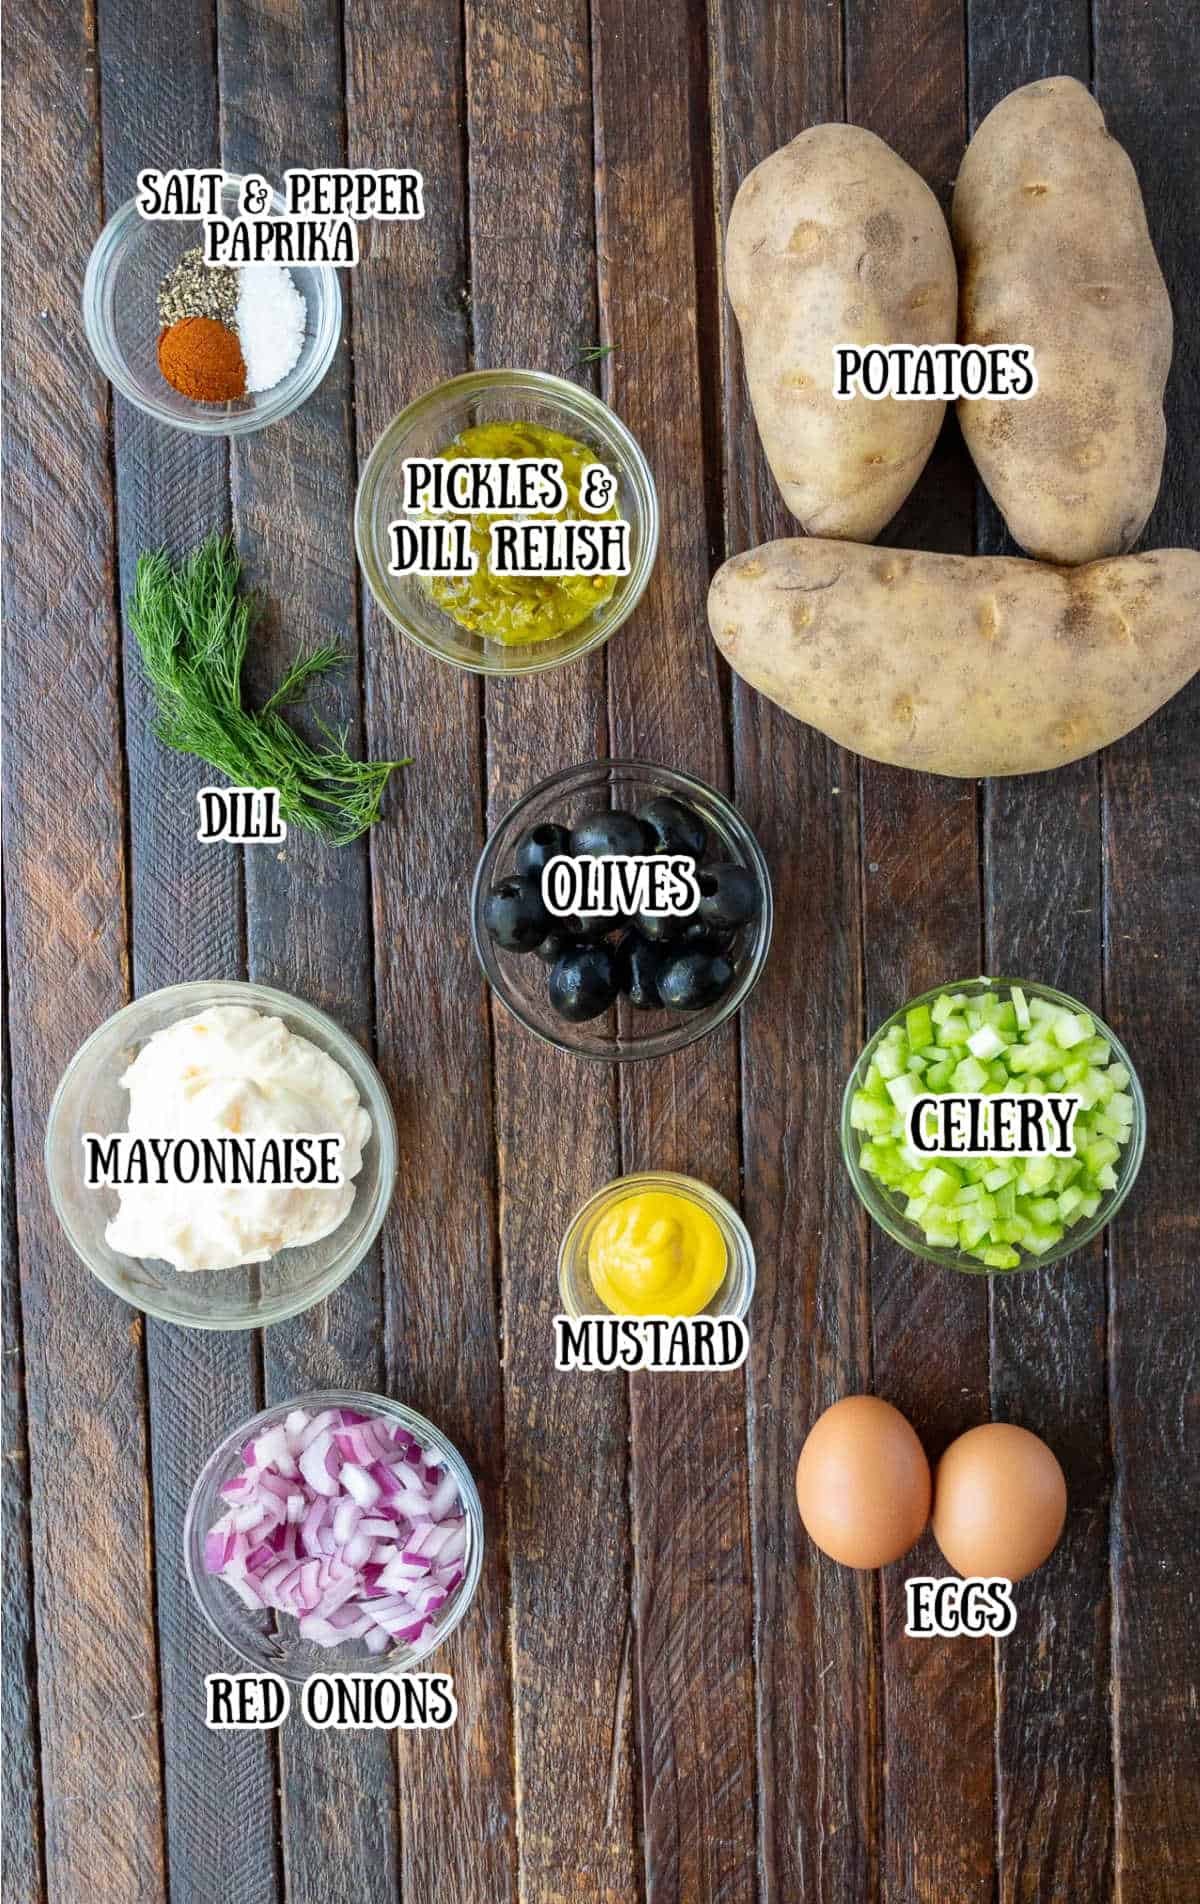 All the ingredients needed for this potato salad.